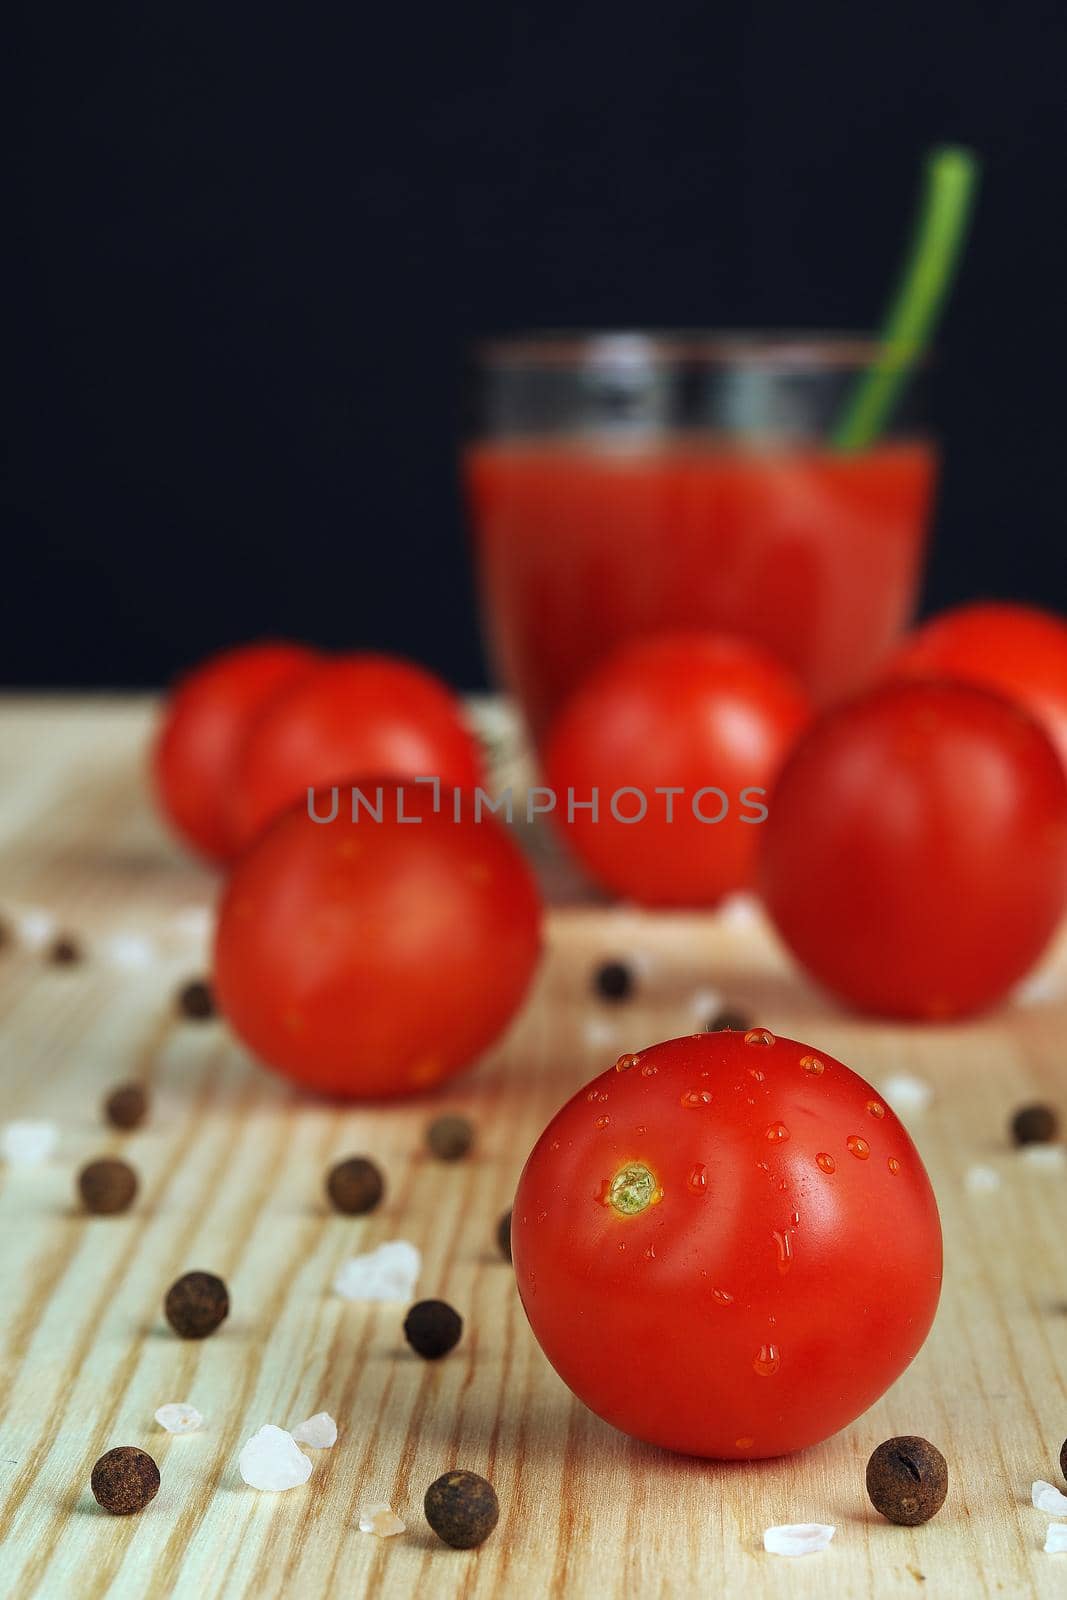 Fresh tomatoes, red tomatoes. Tomato juice freshly squeezed in a transparent glass. by Olga26